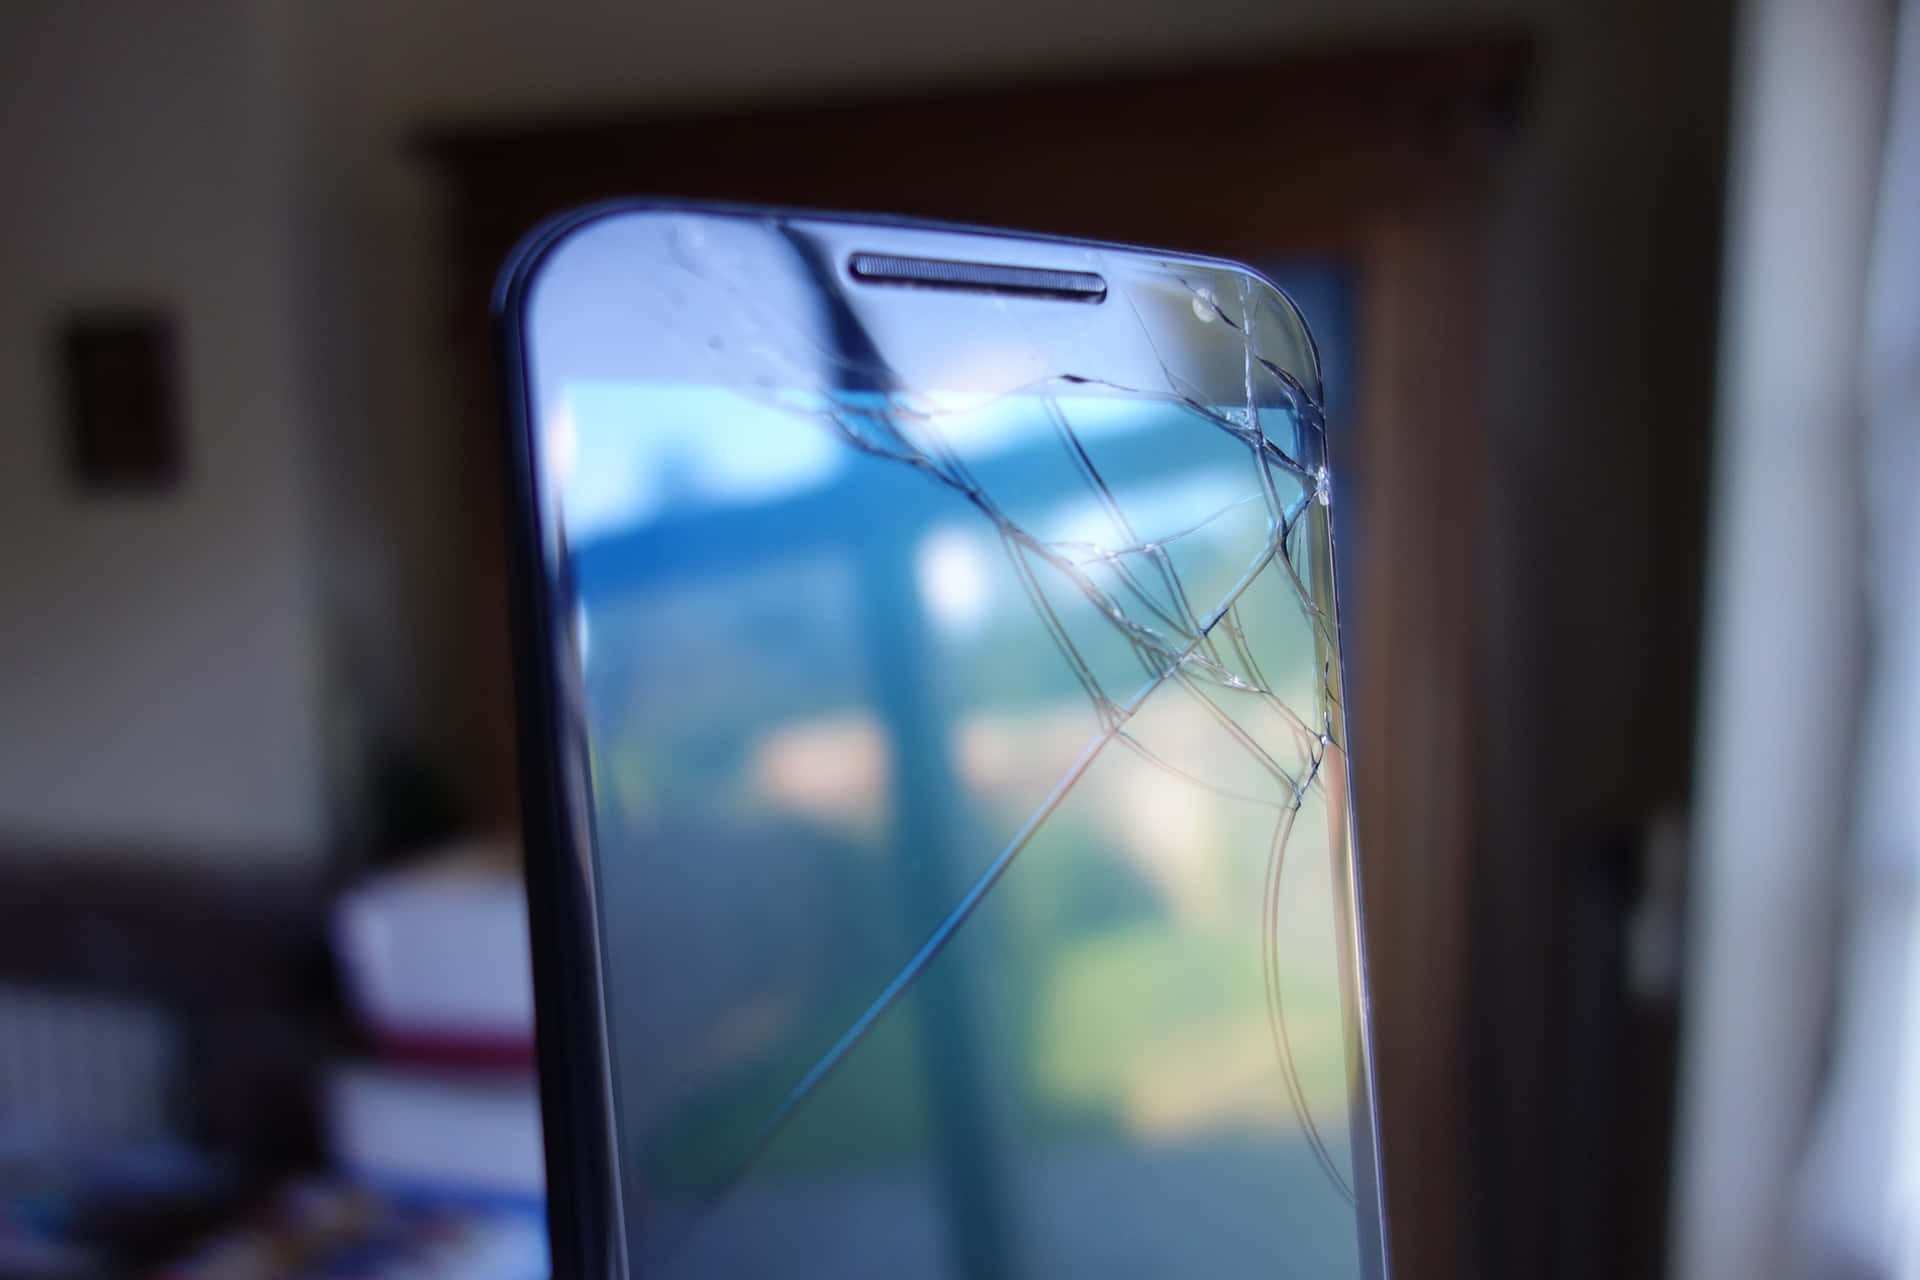 Cracked Screen Pictures